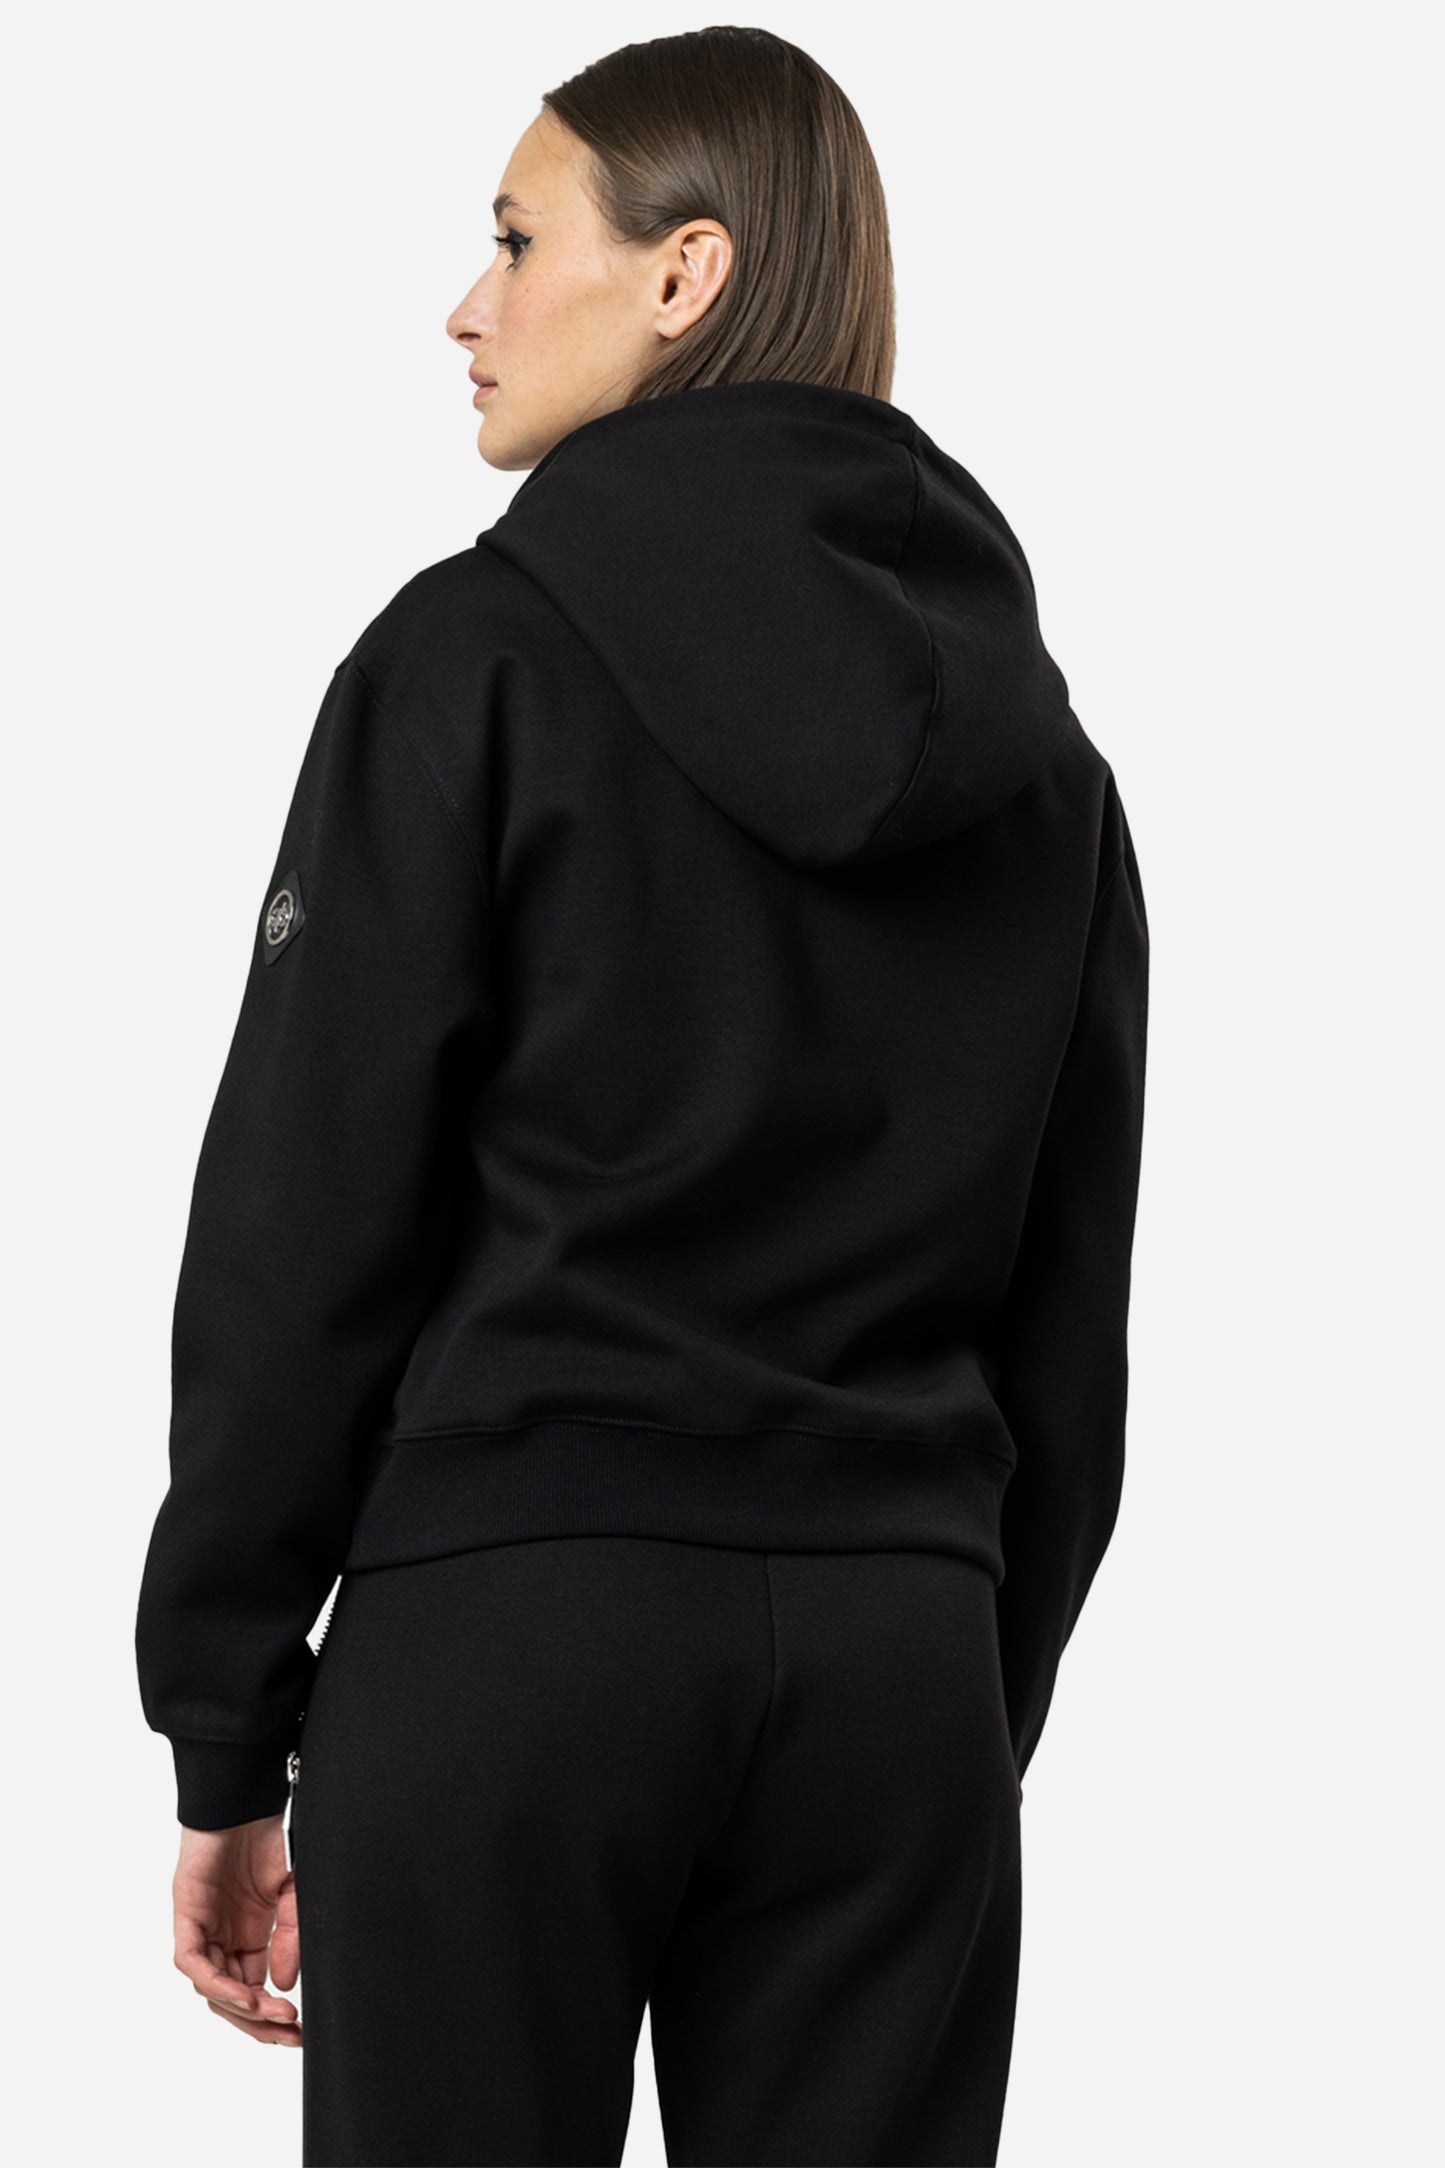 Embroidered Black Kanye Hoodie - Limited to 300